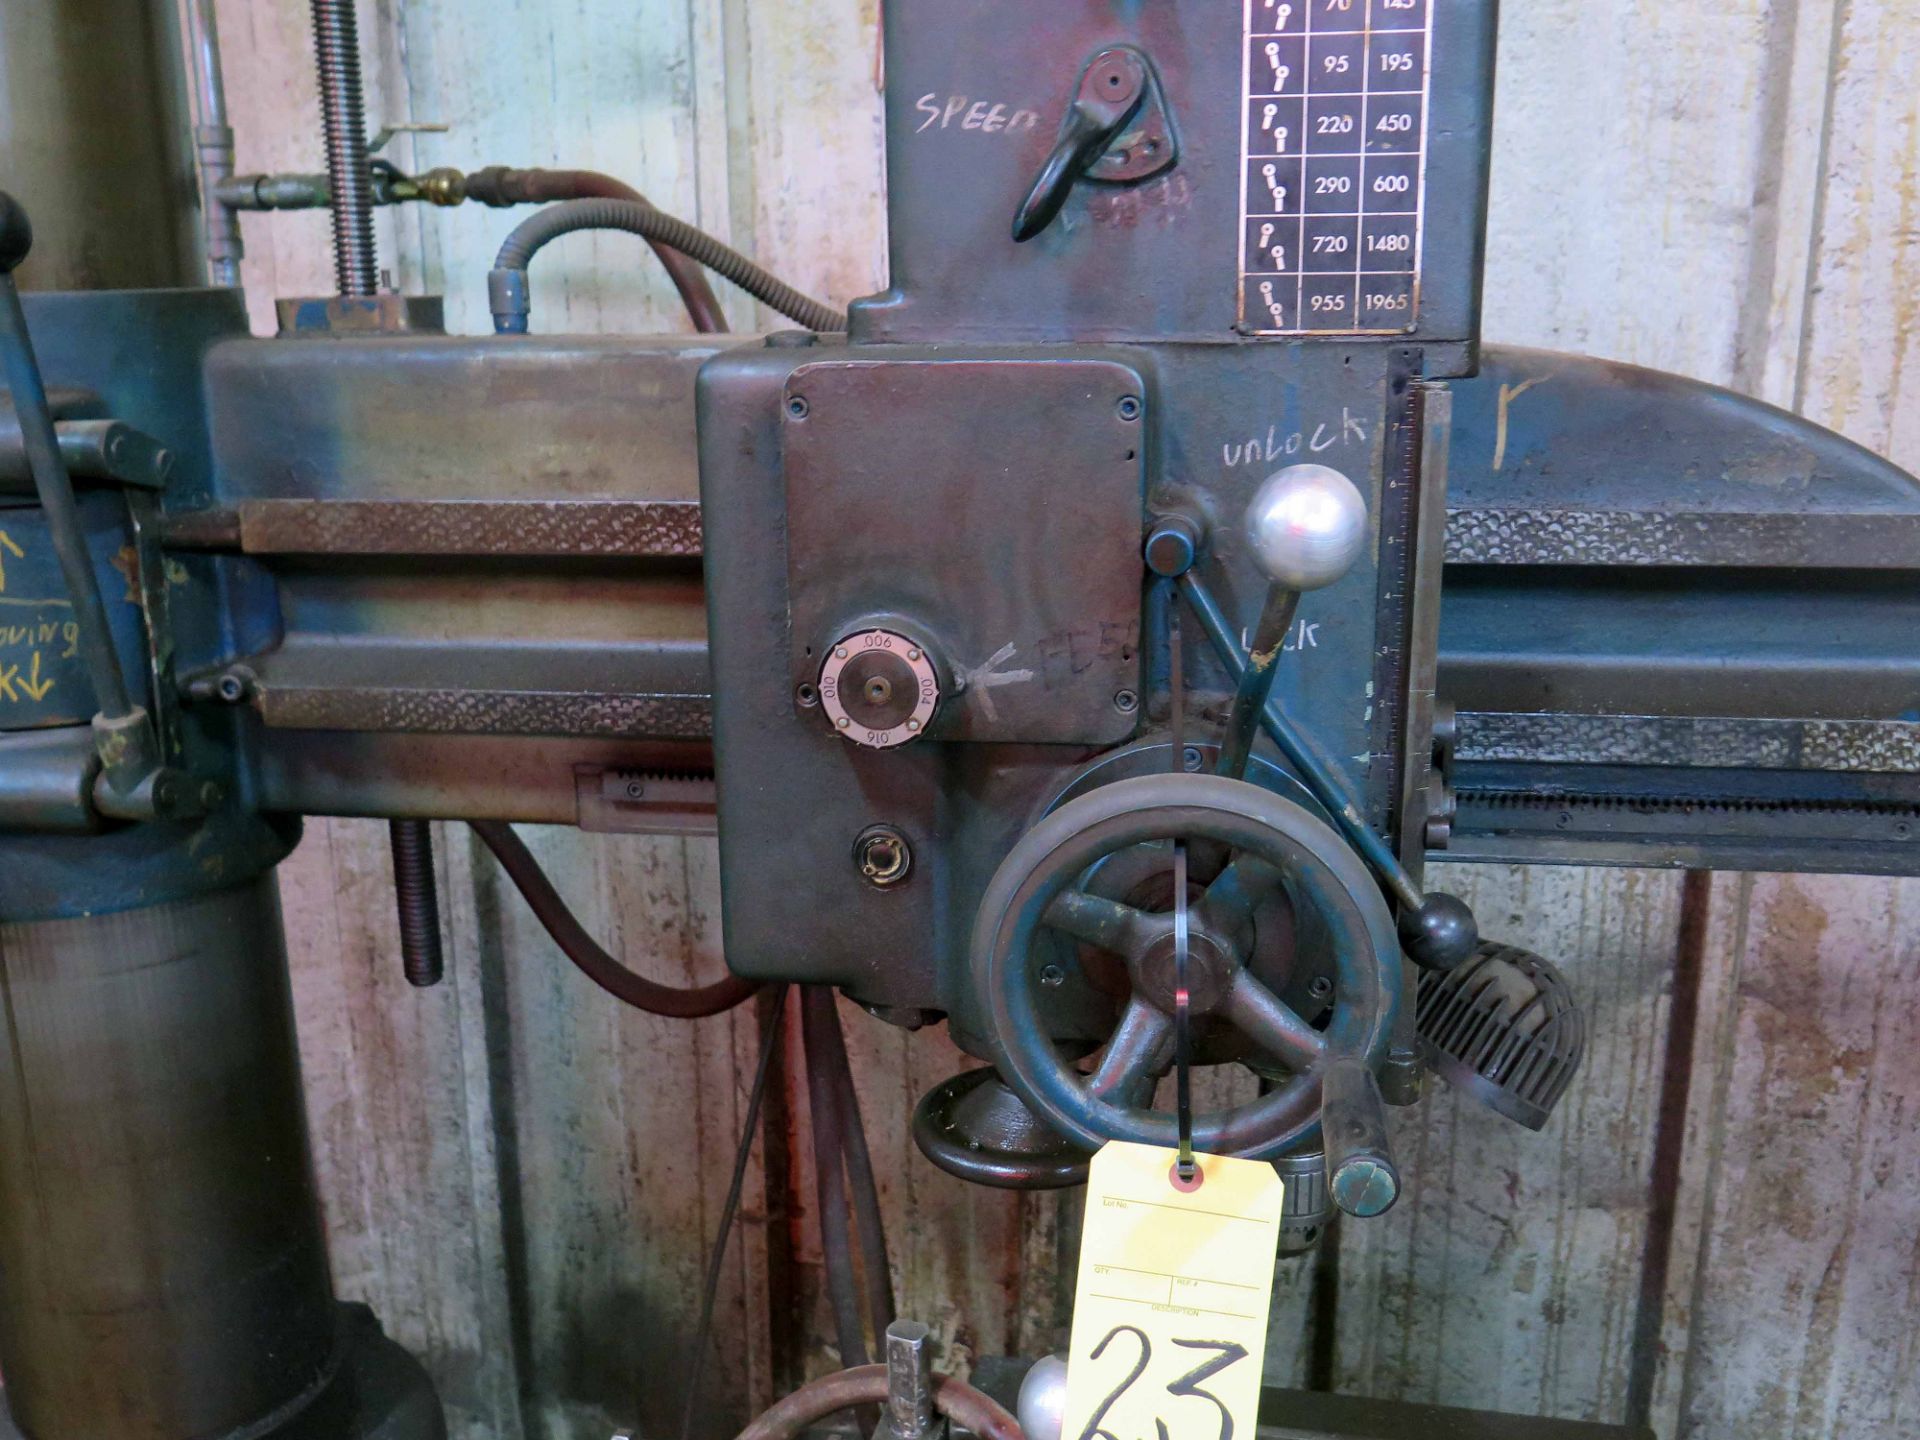 RADIAL ARM DRILL, ARBOGA 3' X 9" MDL. RLM3512, w / box table & vise, spds: 70-1965 RPM, S/N 280549 - Image 3 of 3